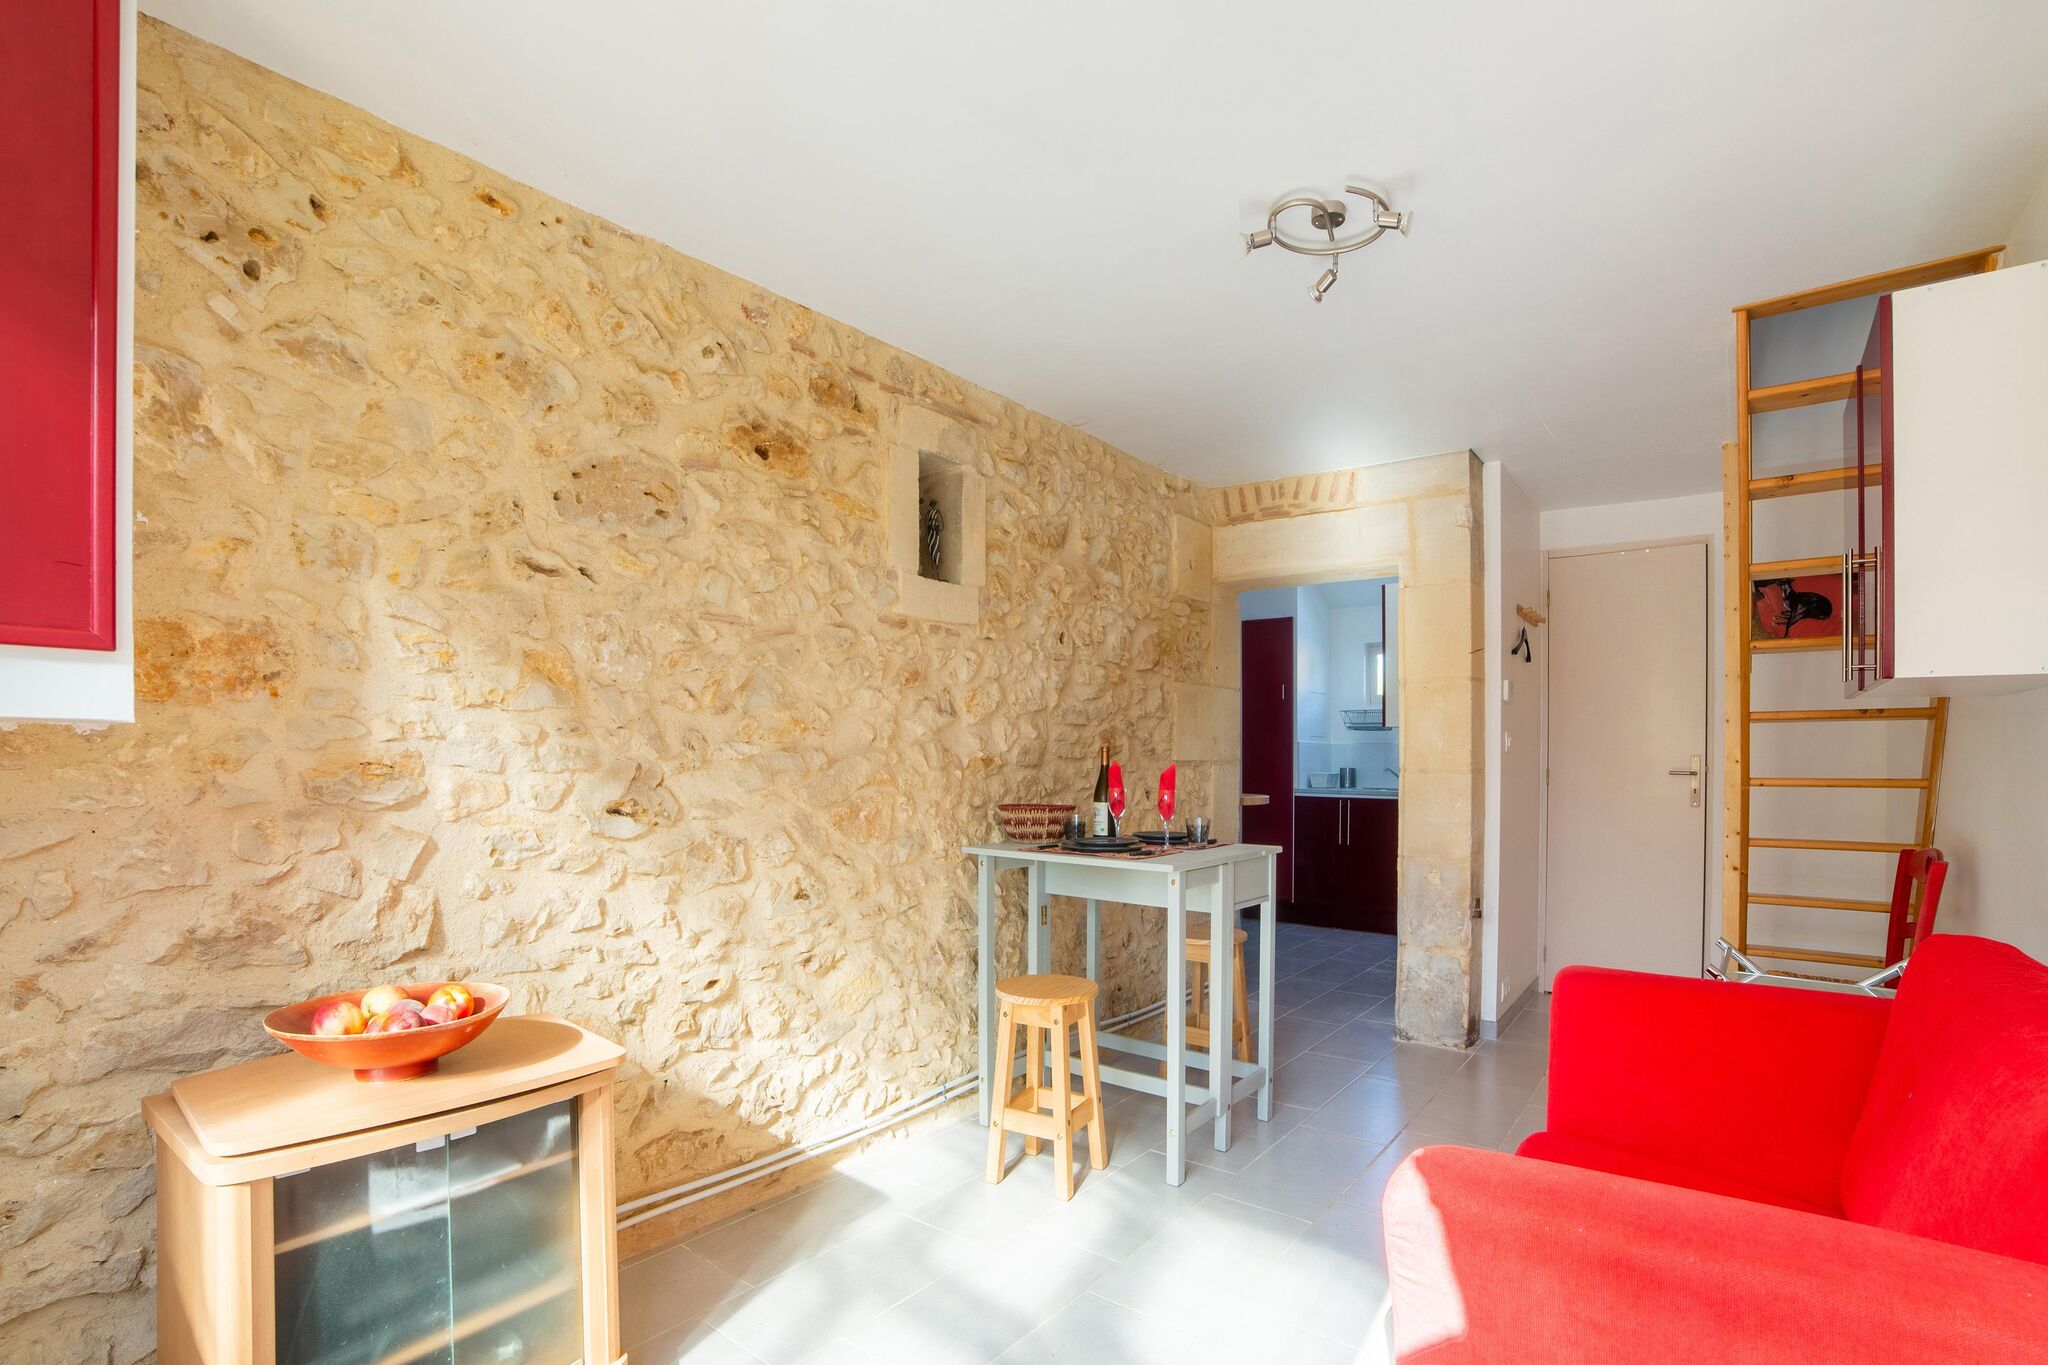 Snug holiday home in Bergerac with terrace